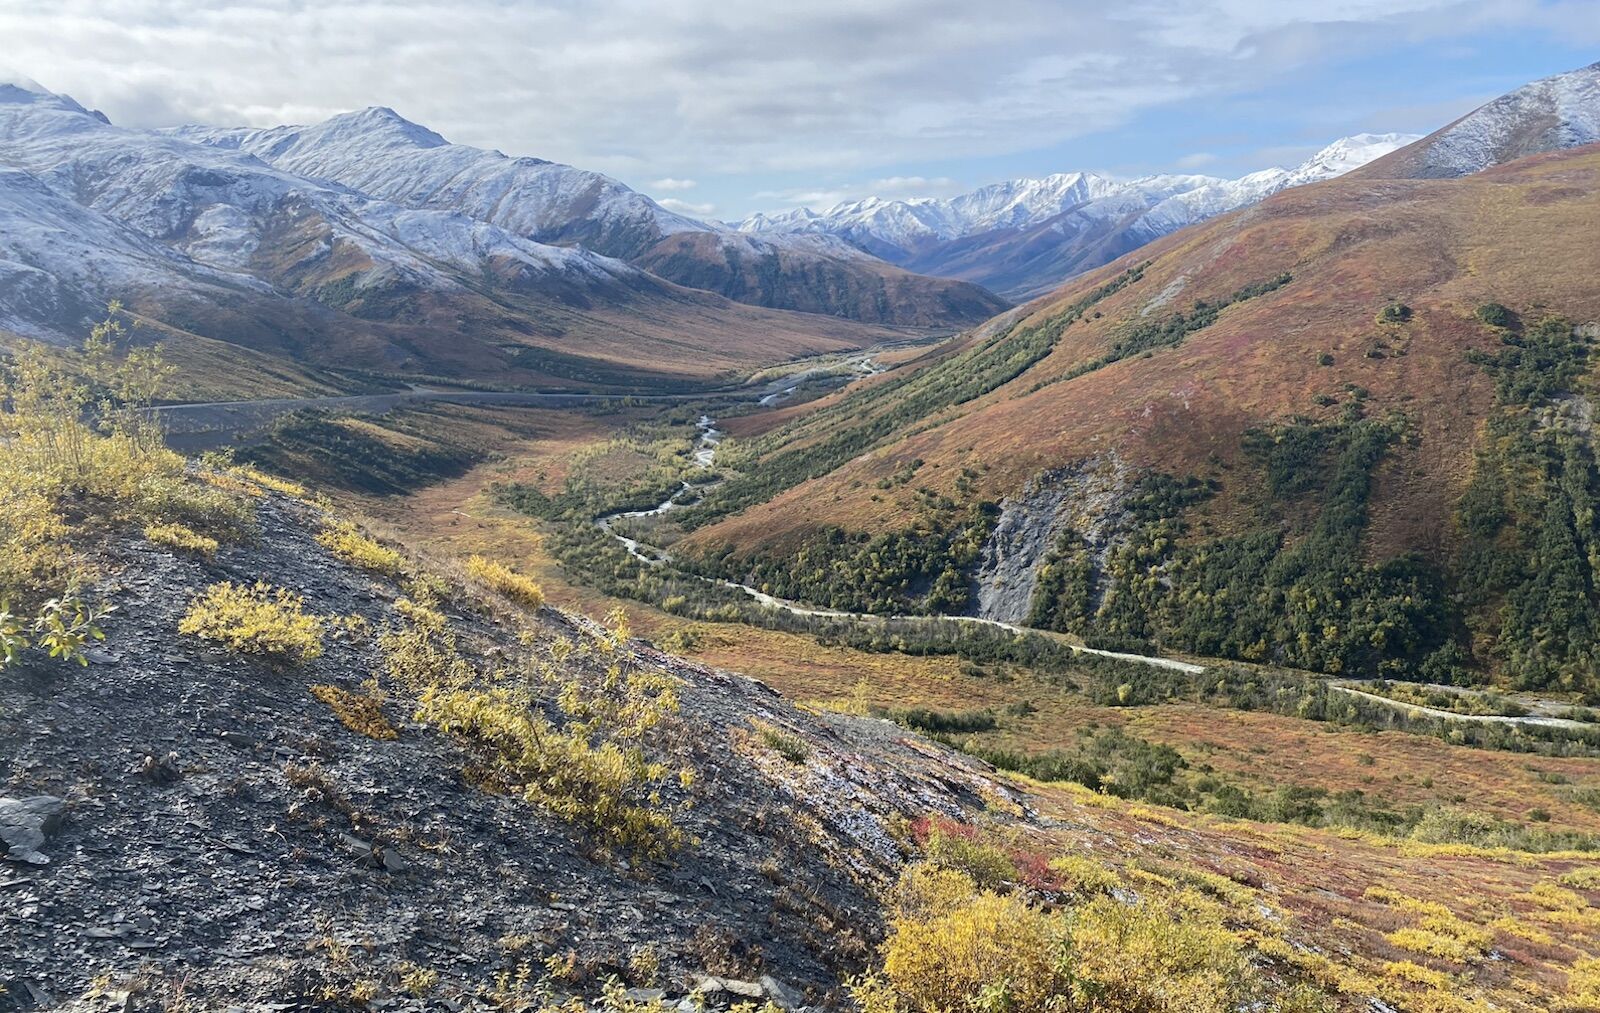 A lookout point along the dalton highway 